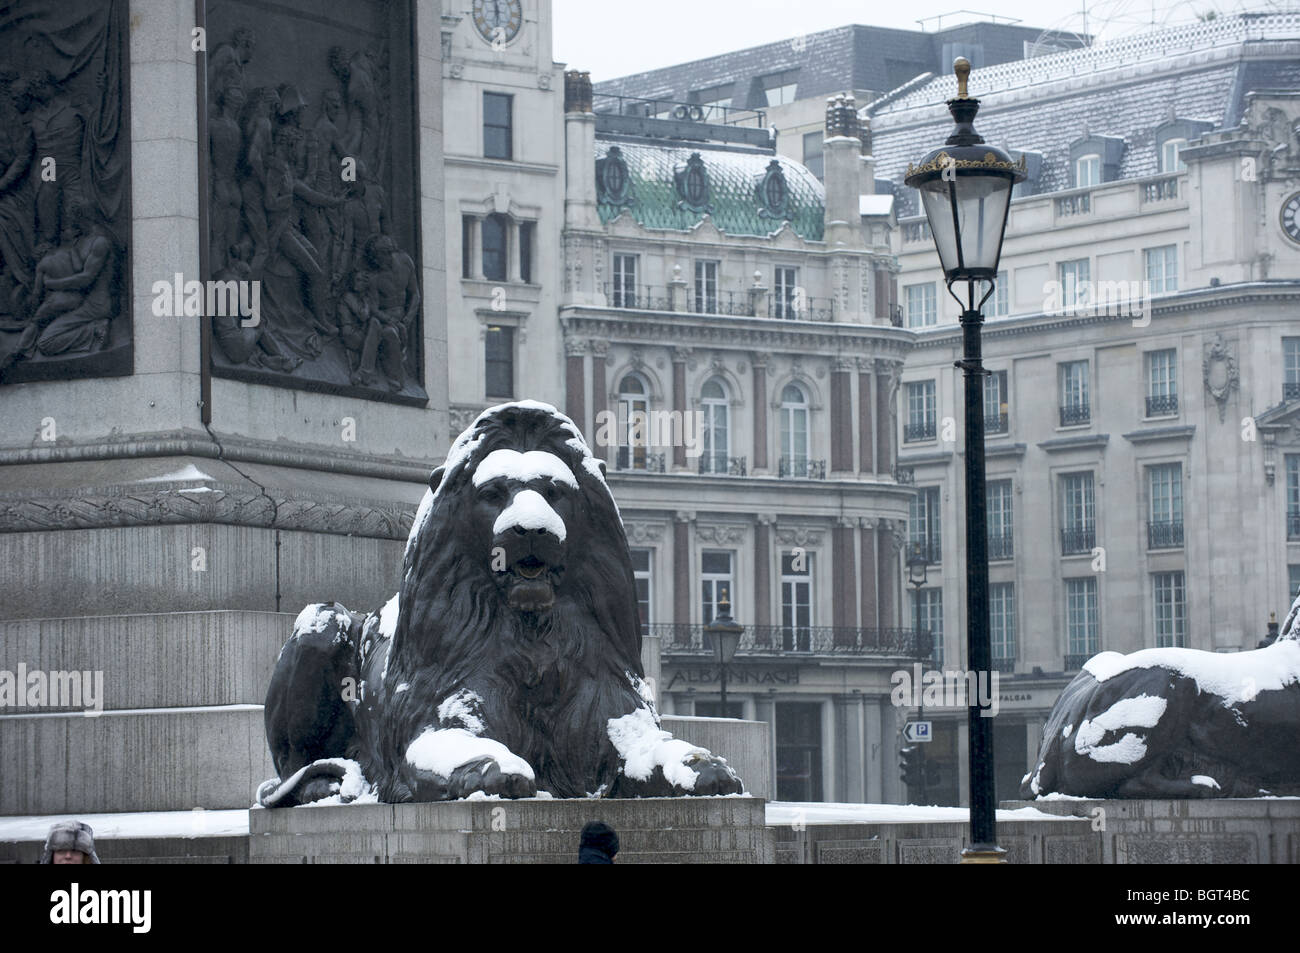 The Lions of Trafalgar Square, London covered in snow Stock Photo